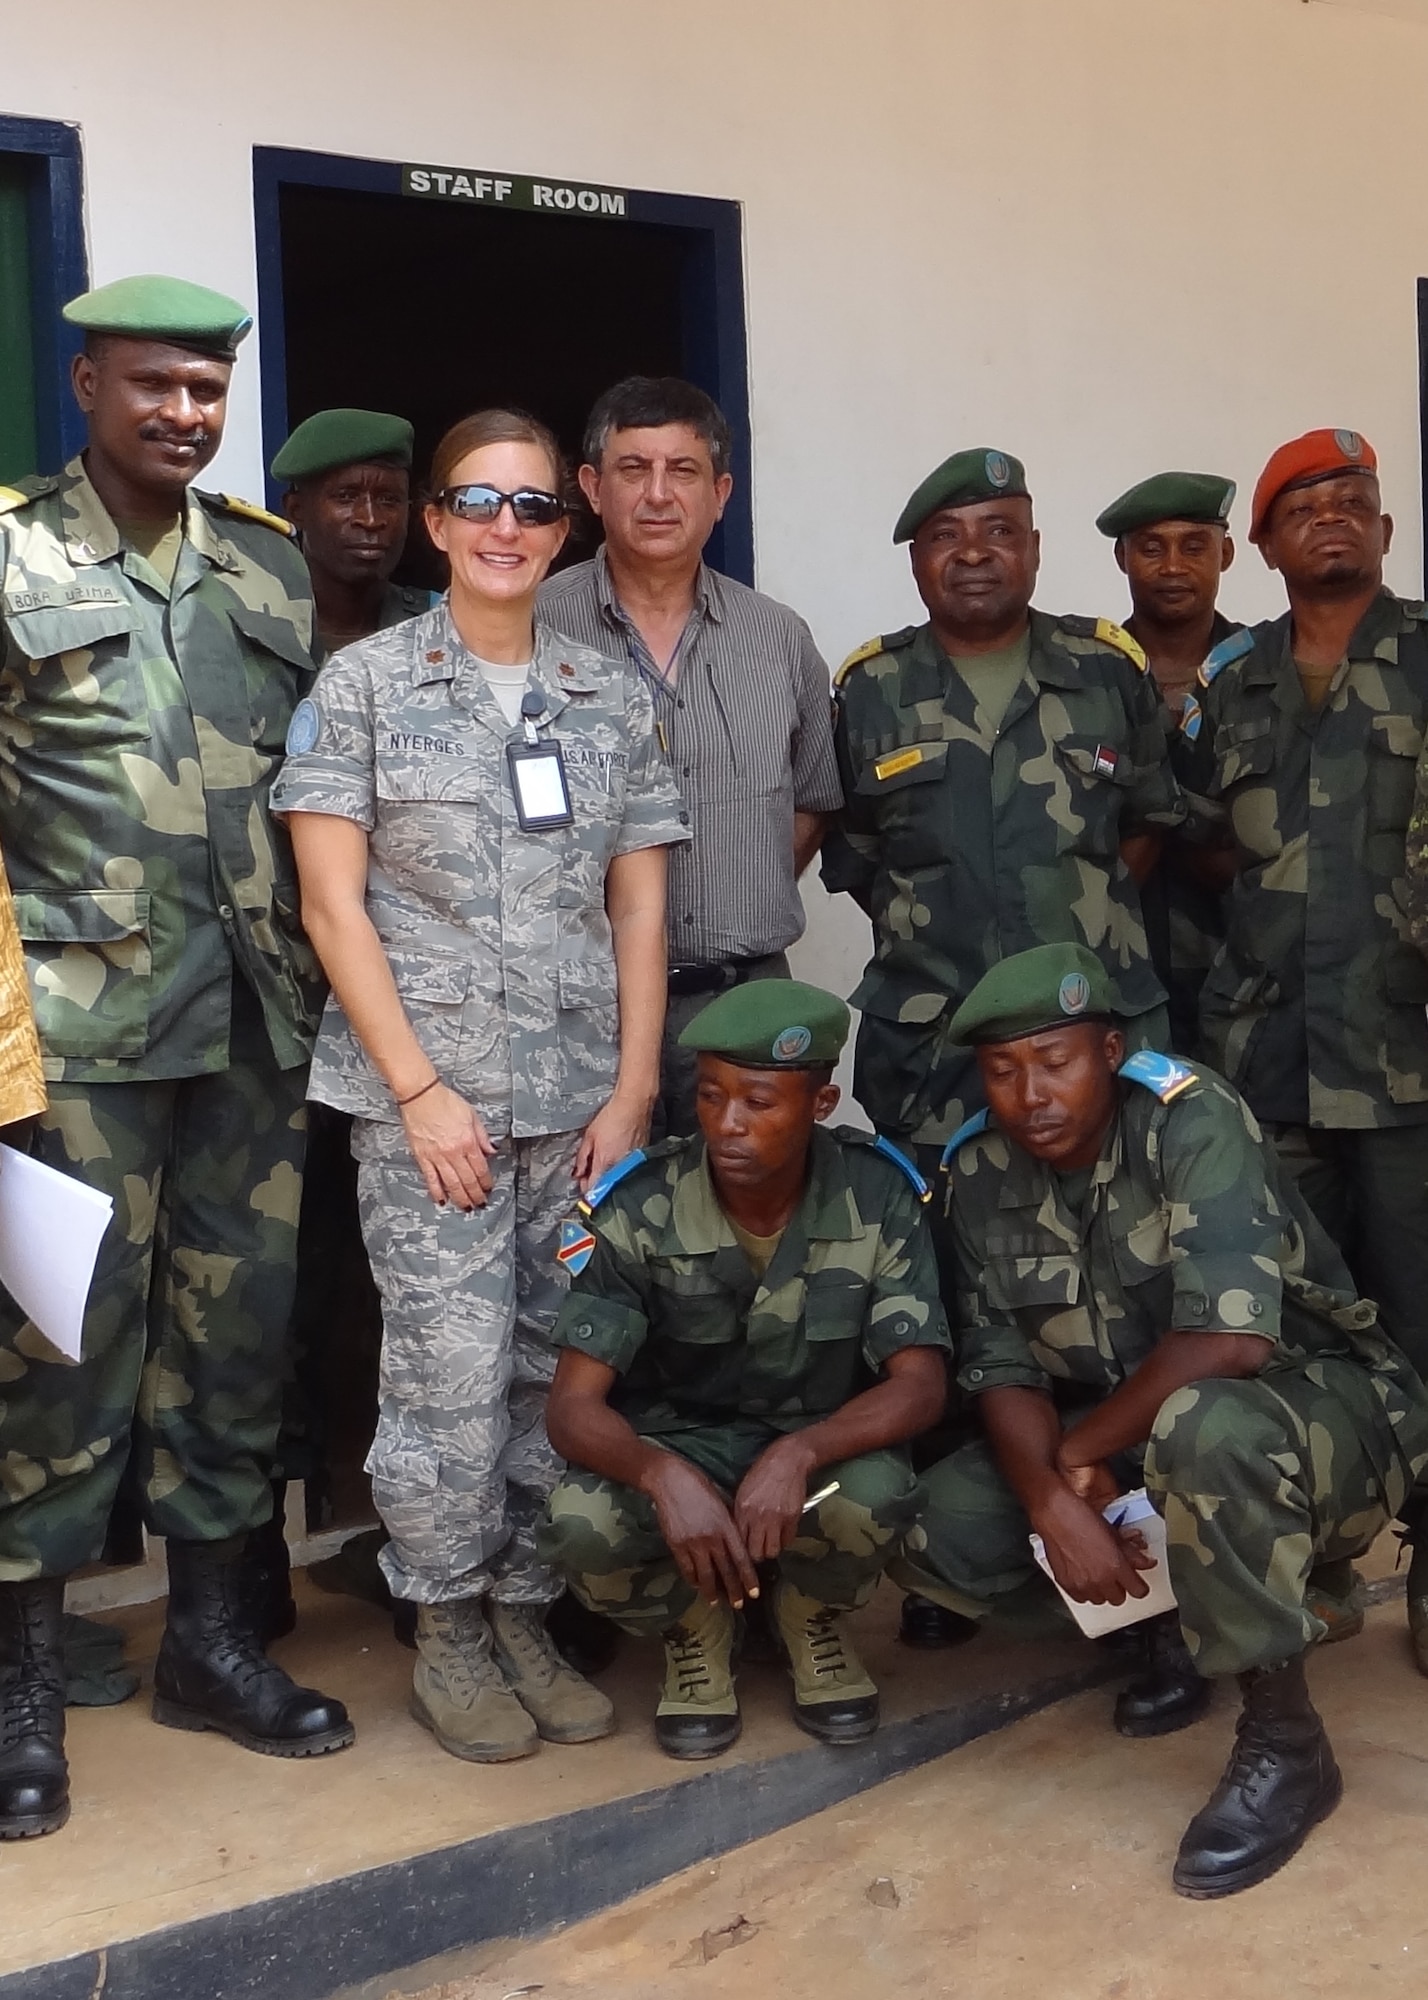 U.S. Air Force Maj. Jana Nyerges spent six months with a UN Peacekeeping mission in Goma, Democratic Republic of the Congo, working with DRC government military. While she was stationed there in 2012, M23 rebels took over Goma. (U.S. Air Force Photo courtesy of Maj. Jana Nyerges/Released.